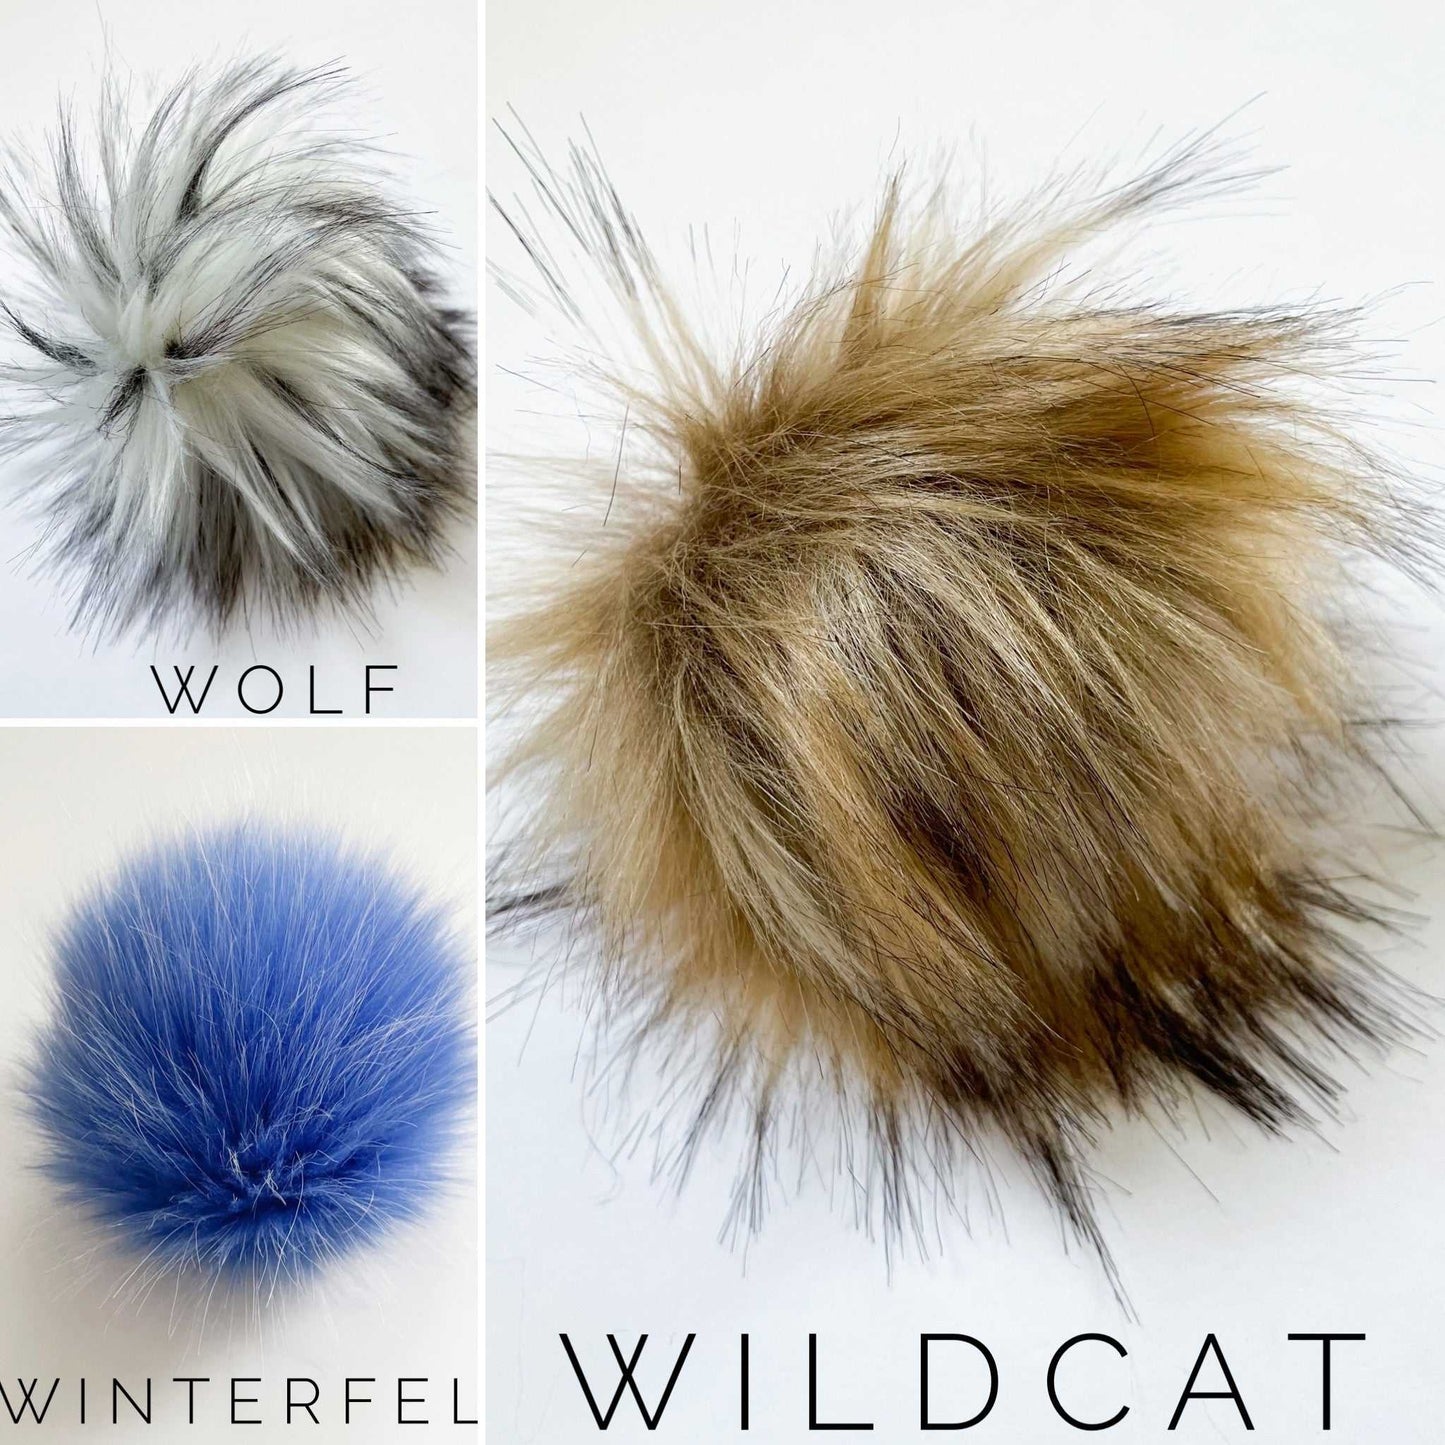 Grey Wolf Luxury Faux Fur Pompom | Pom pom with Ties, Buttons or Snaps Pom Poms 5 $ Buttons & Beans Co.